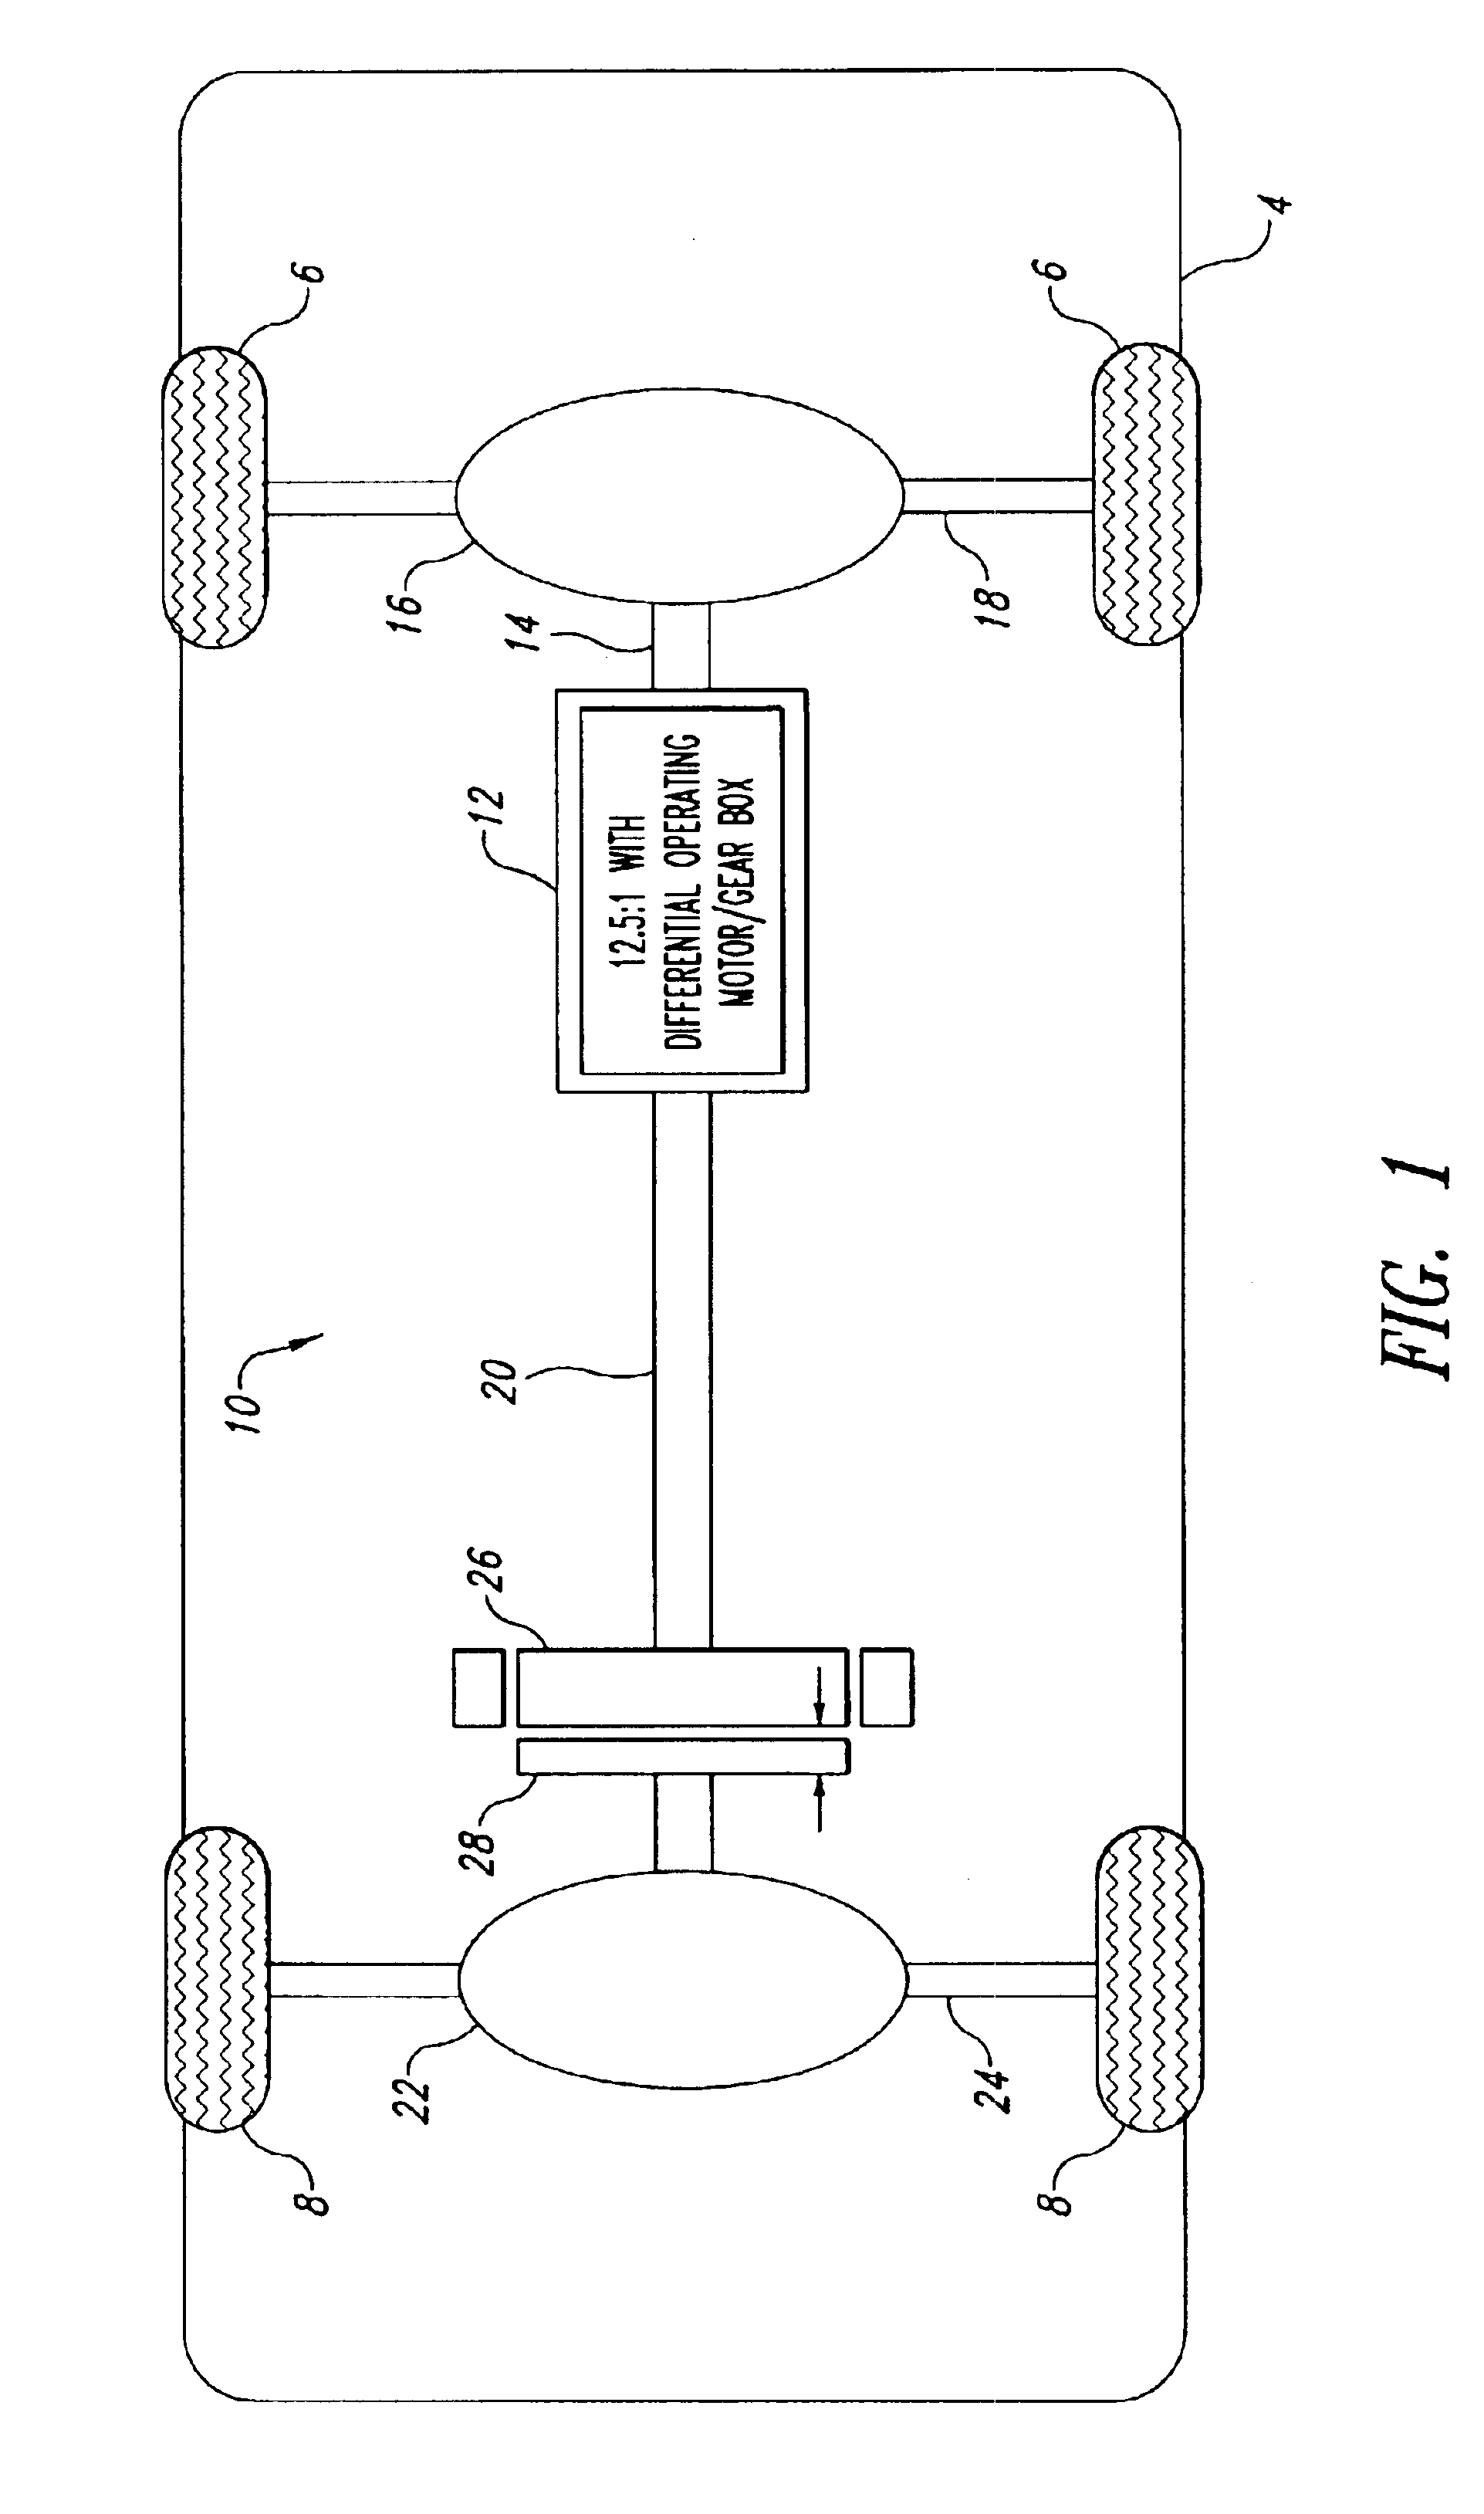 Apparatus and method to achieve multiple effective ratios from a fixed ratio transaxle